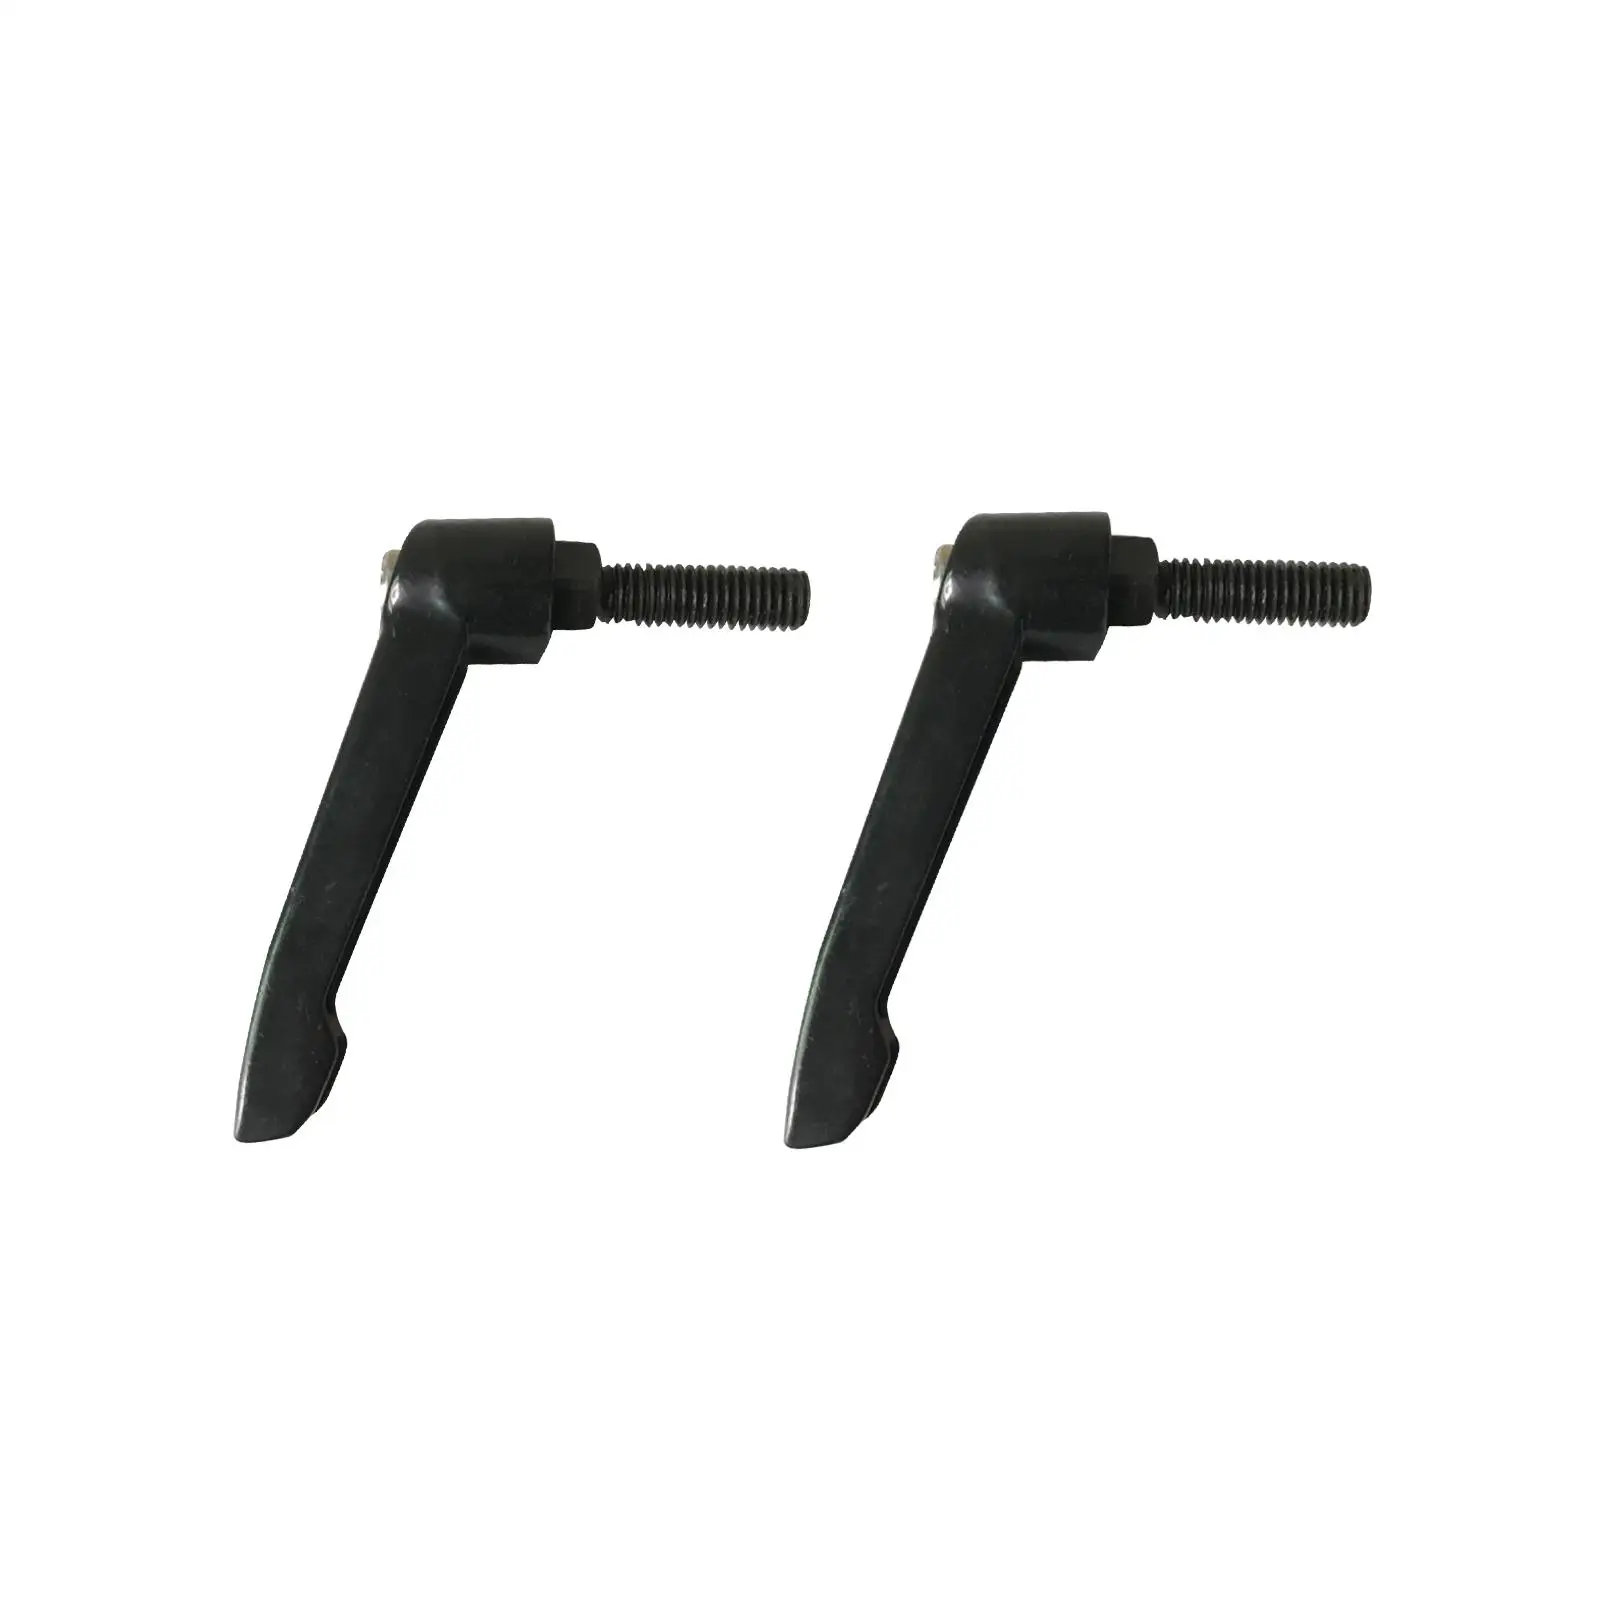 Spring Knob Pin Attachments for Exercise Training Machine, Equipment Parts